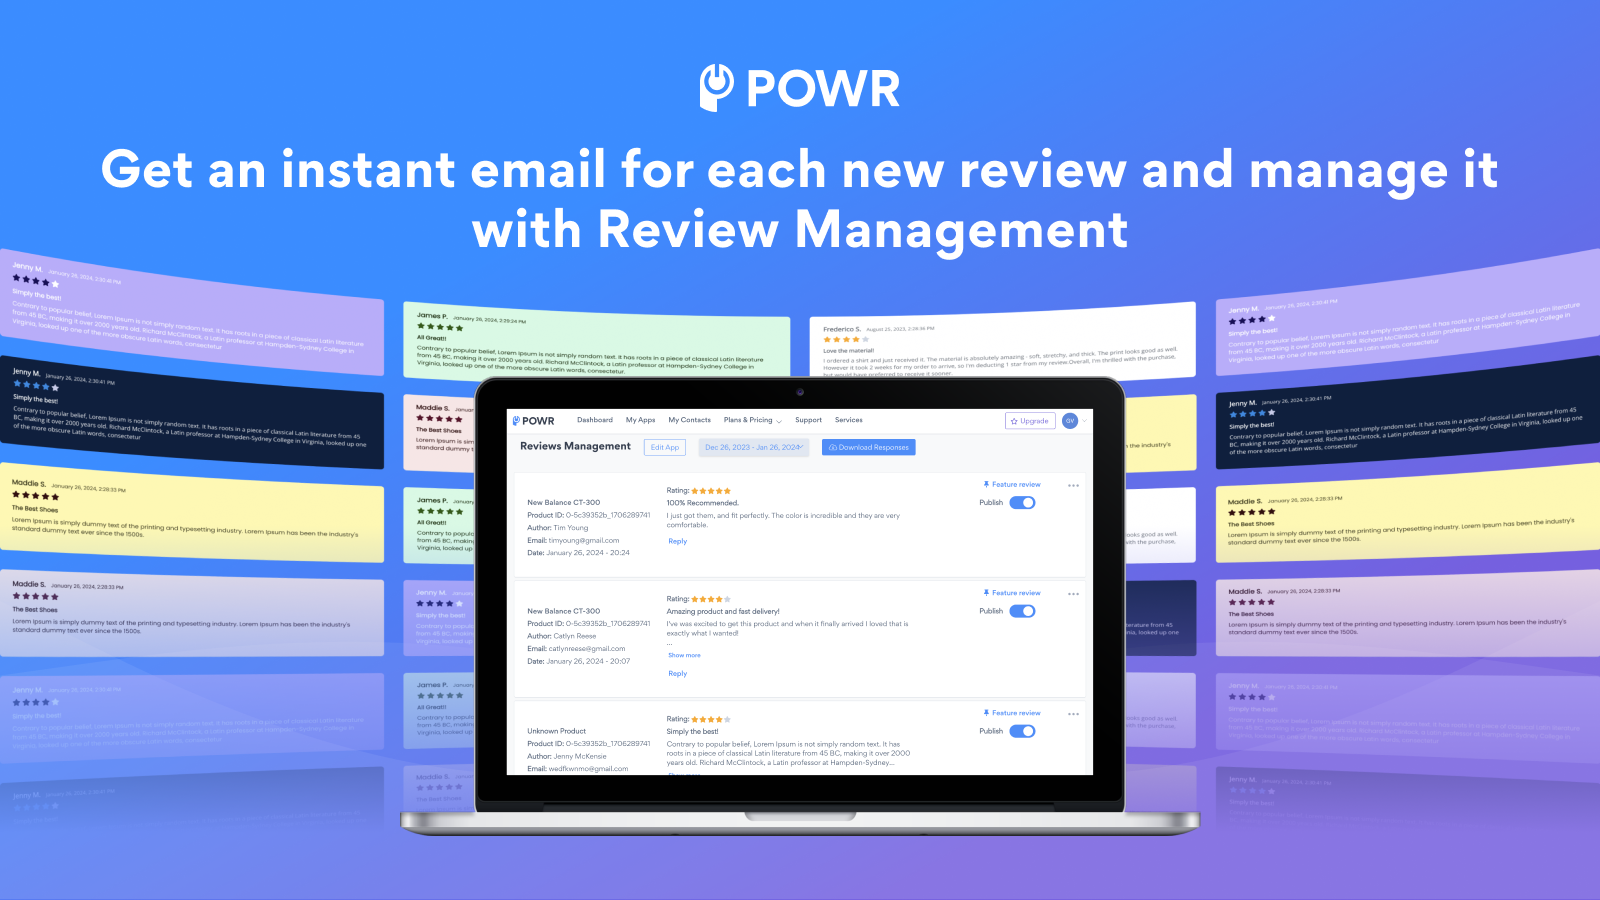 Get an instant email for each new review with Review Management.